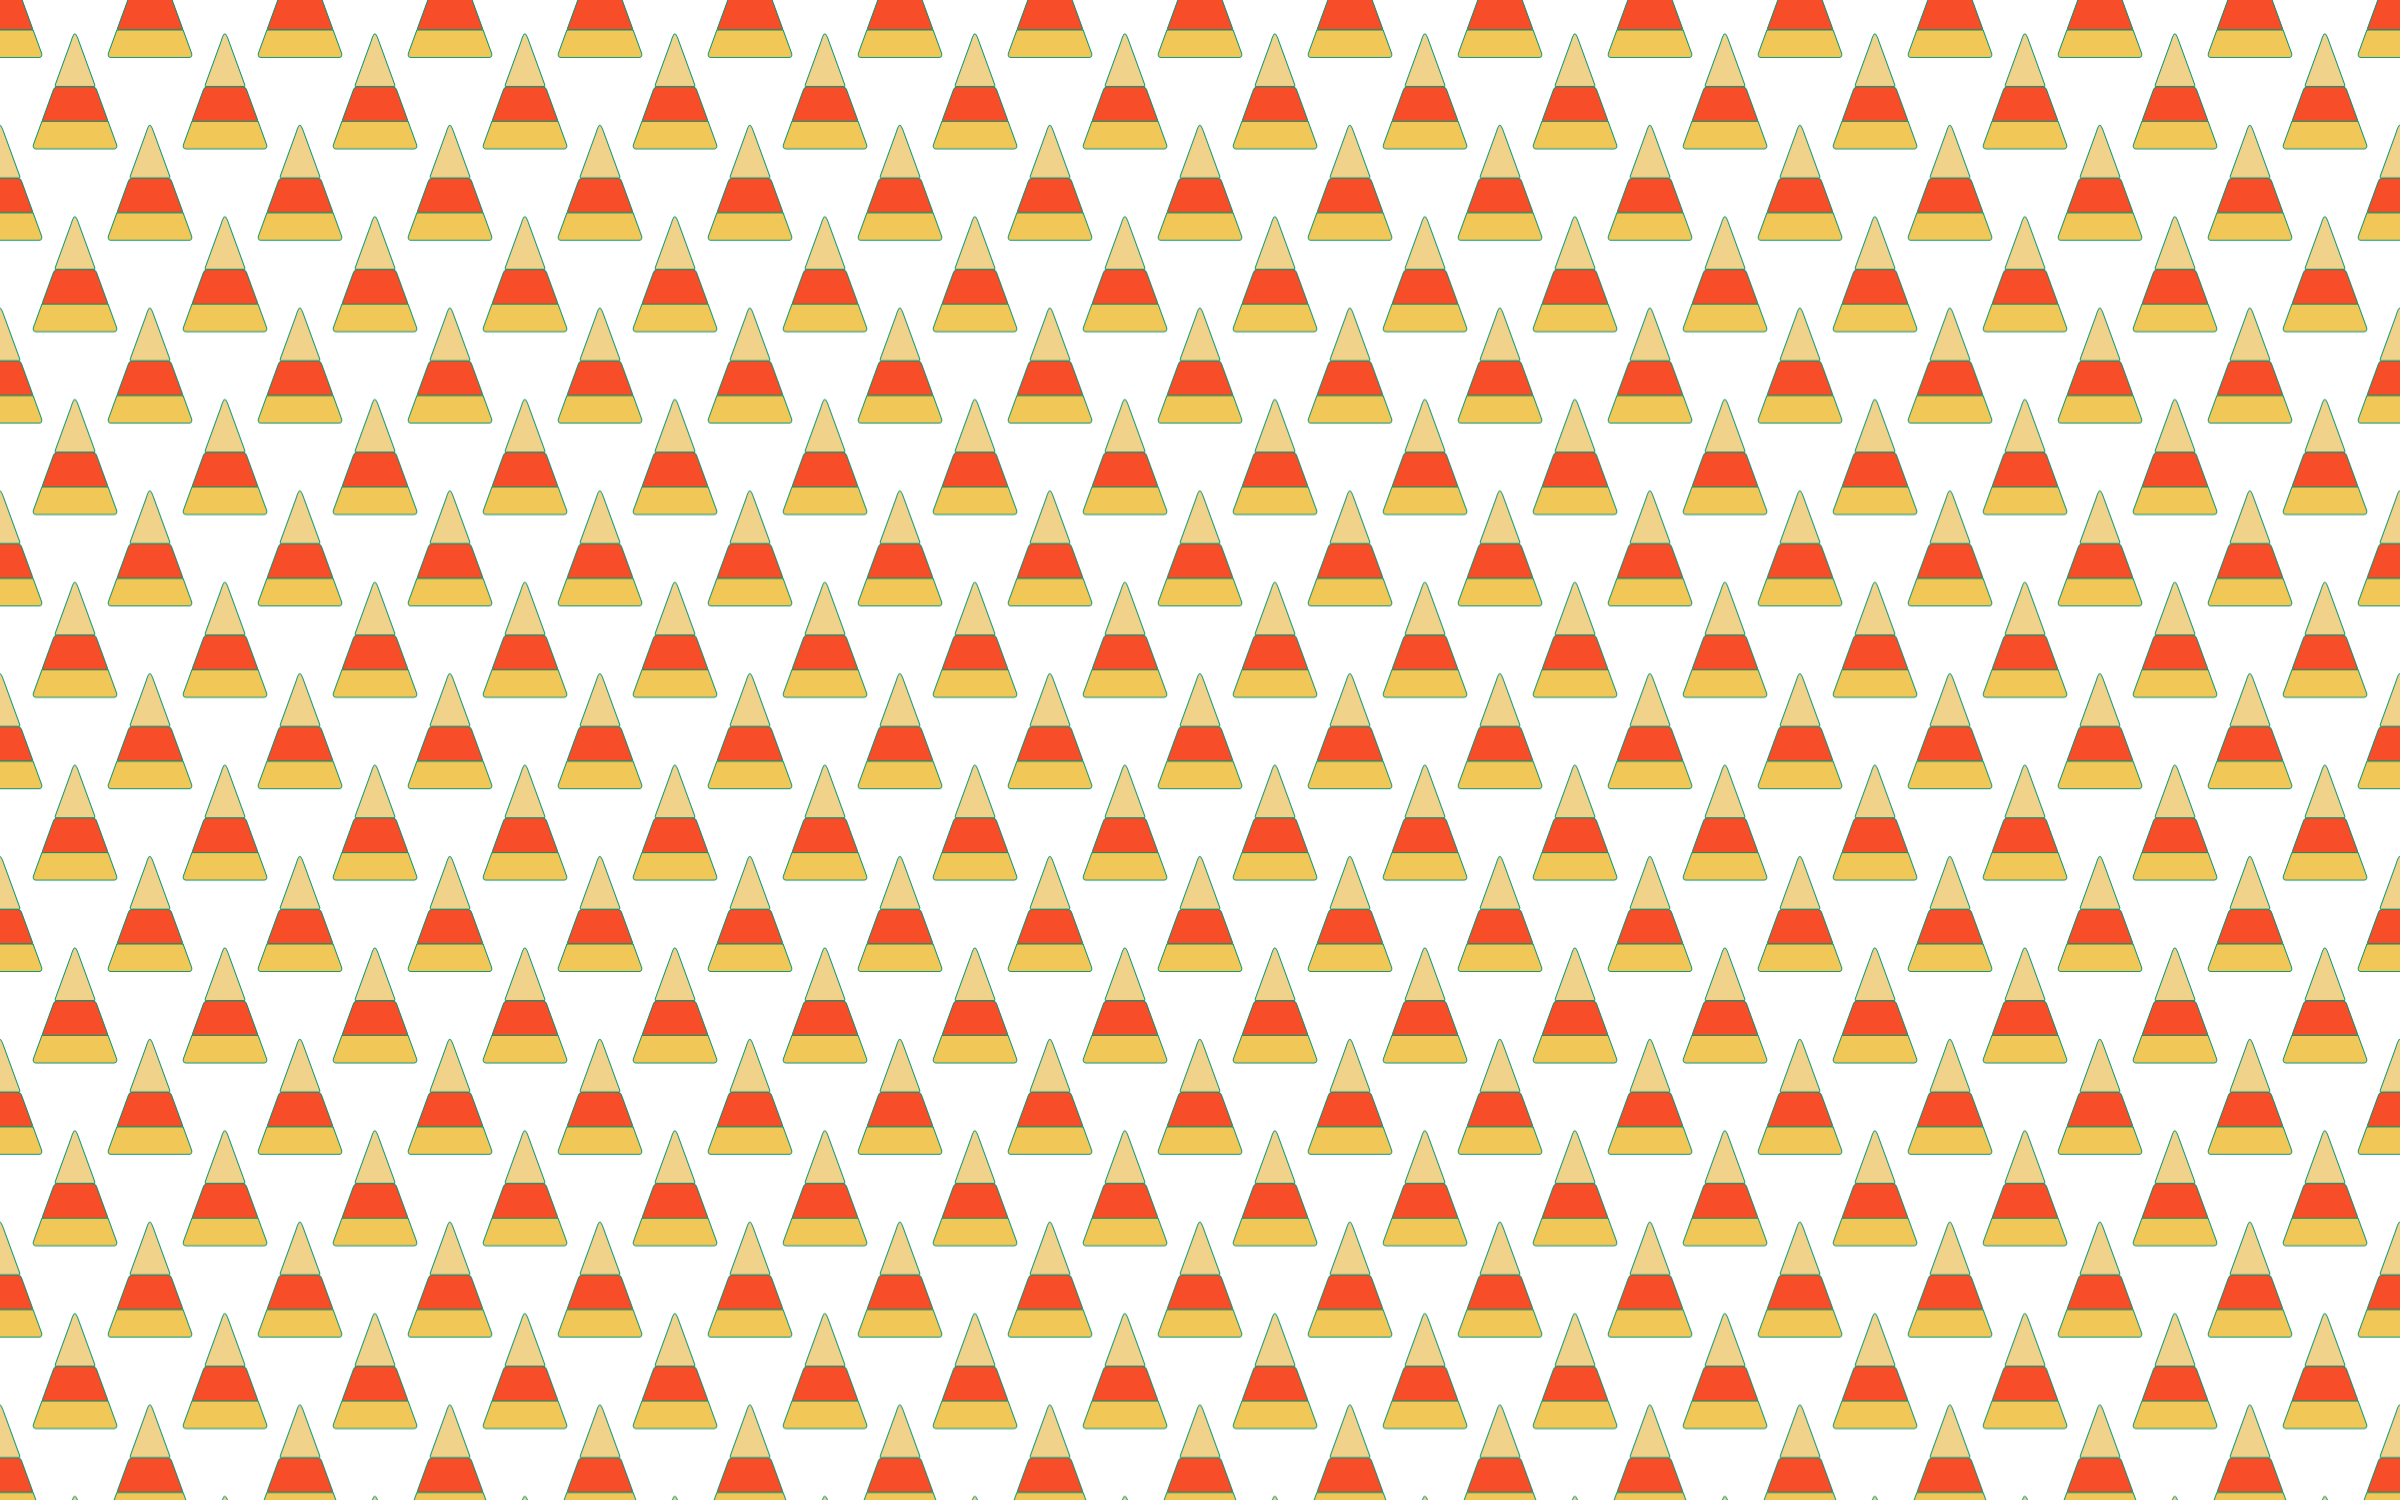 clipart candy candy corn